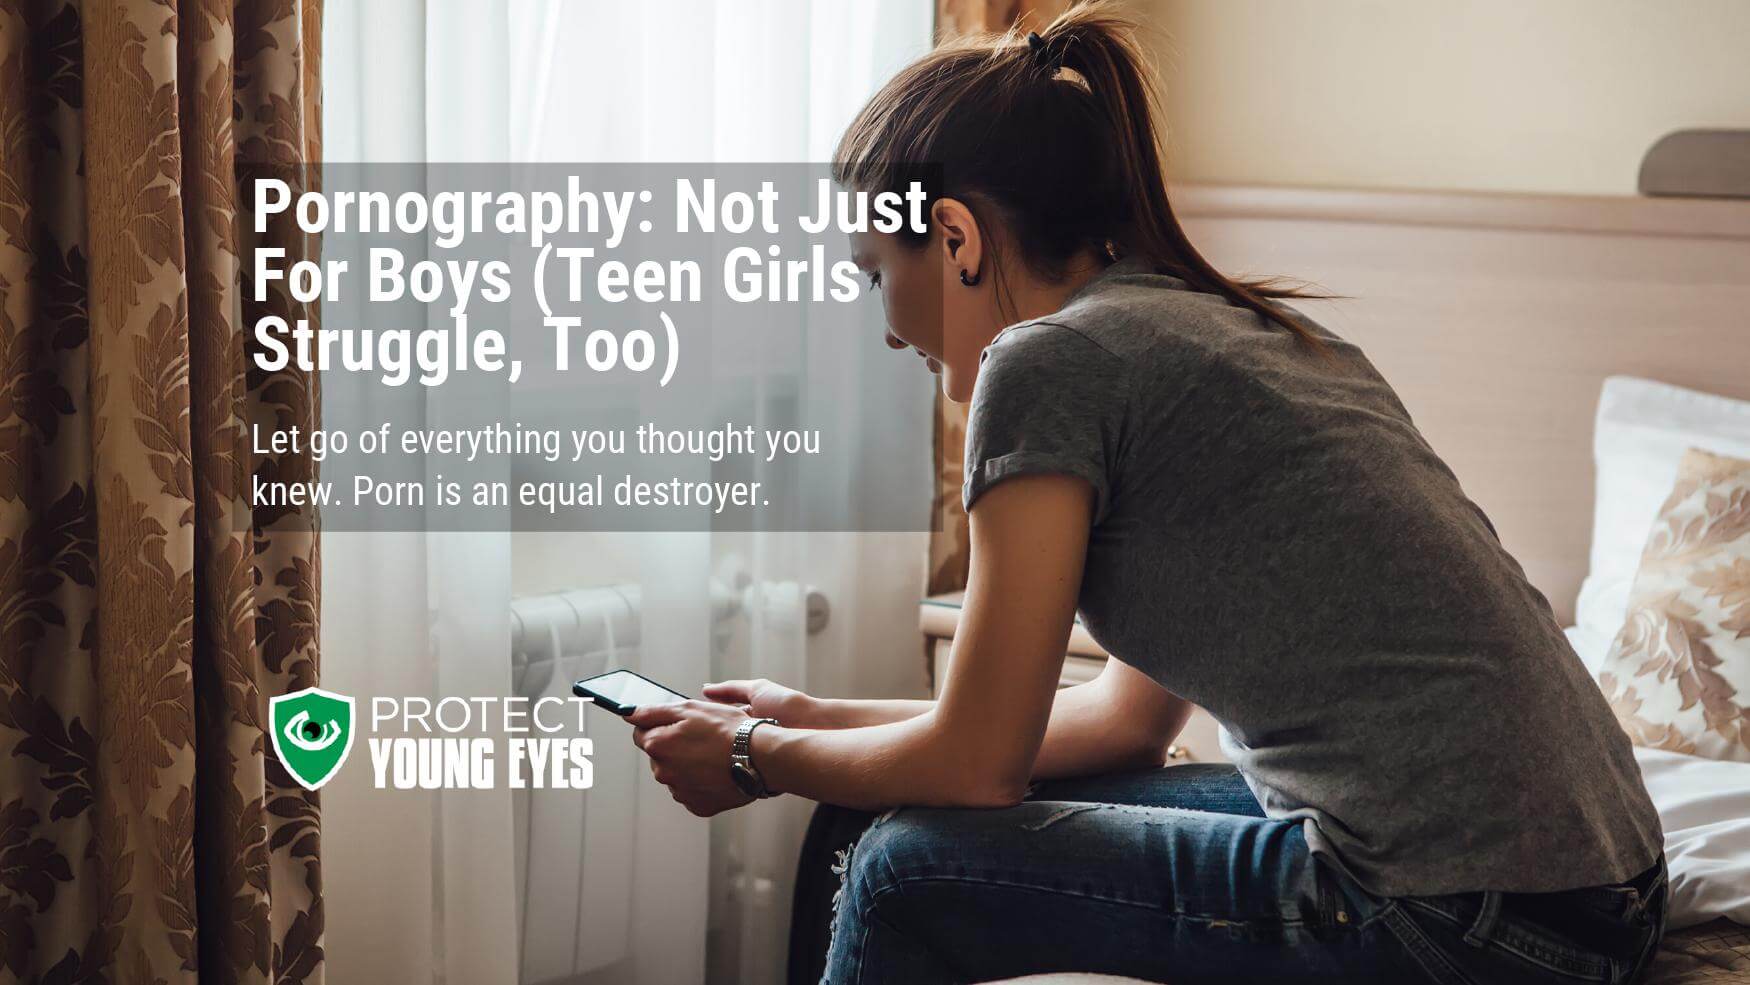 Teen Girls Look at Porn, Too (not just boys) | Protect Young Eyes